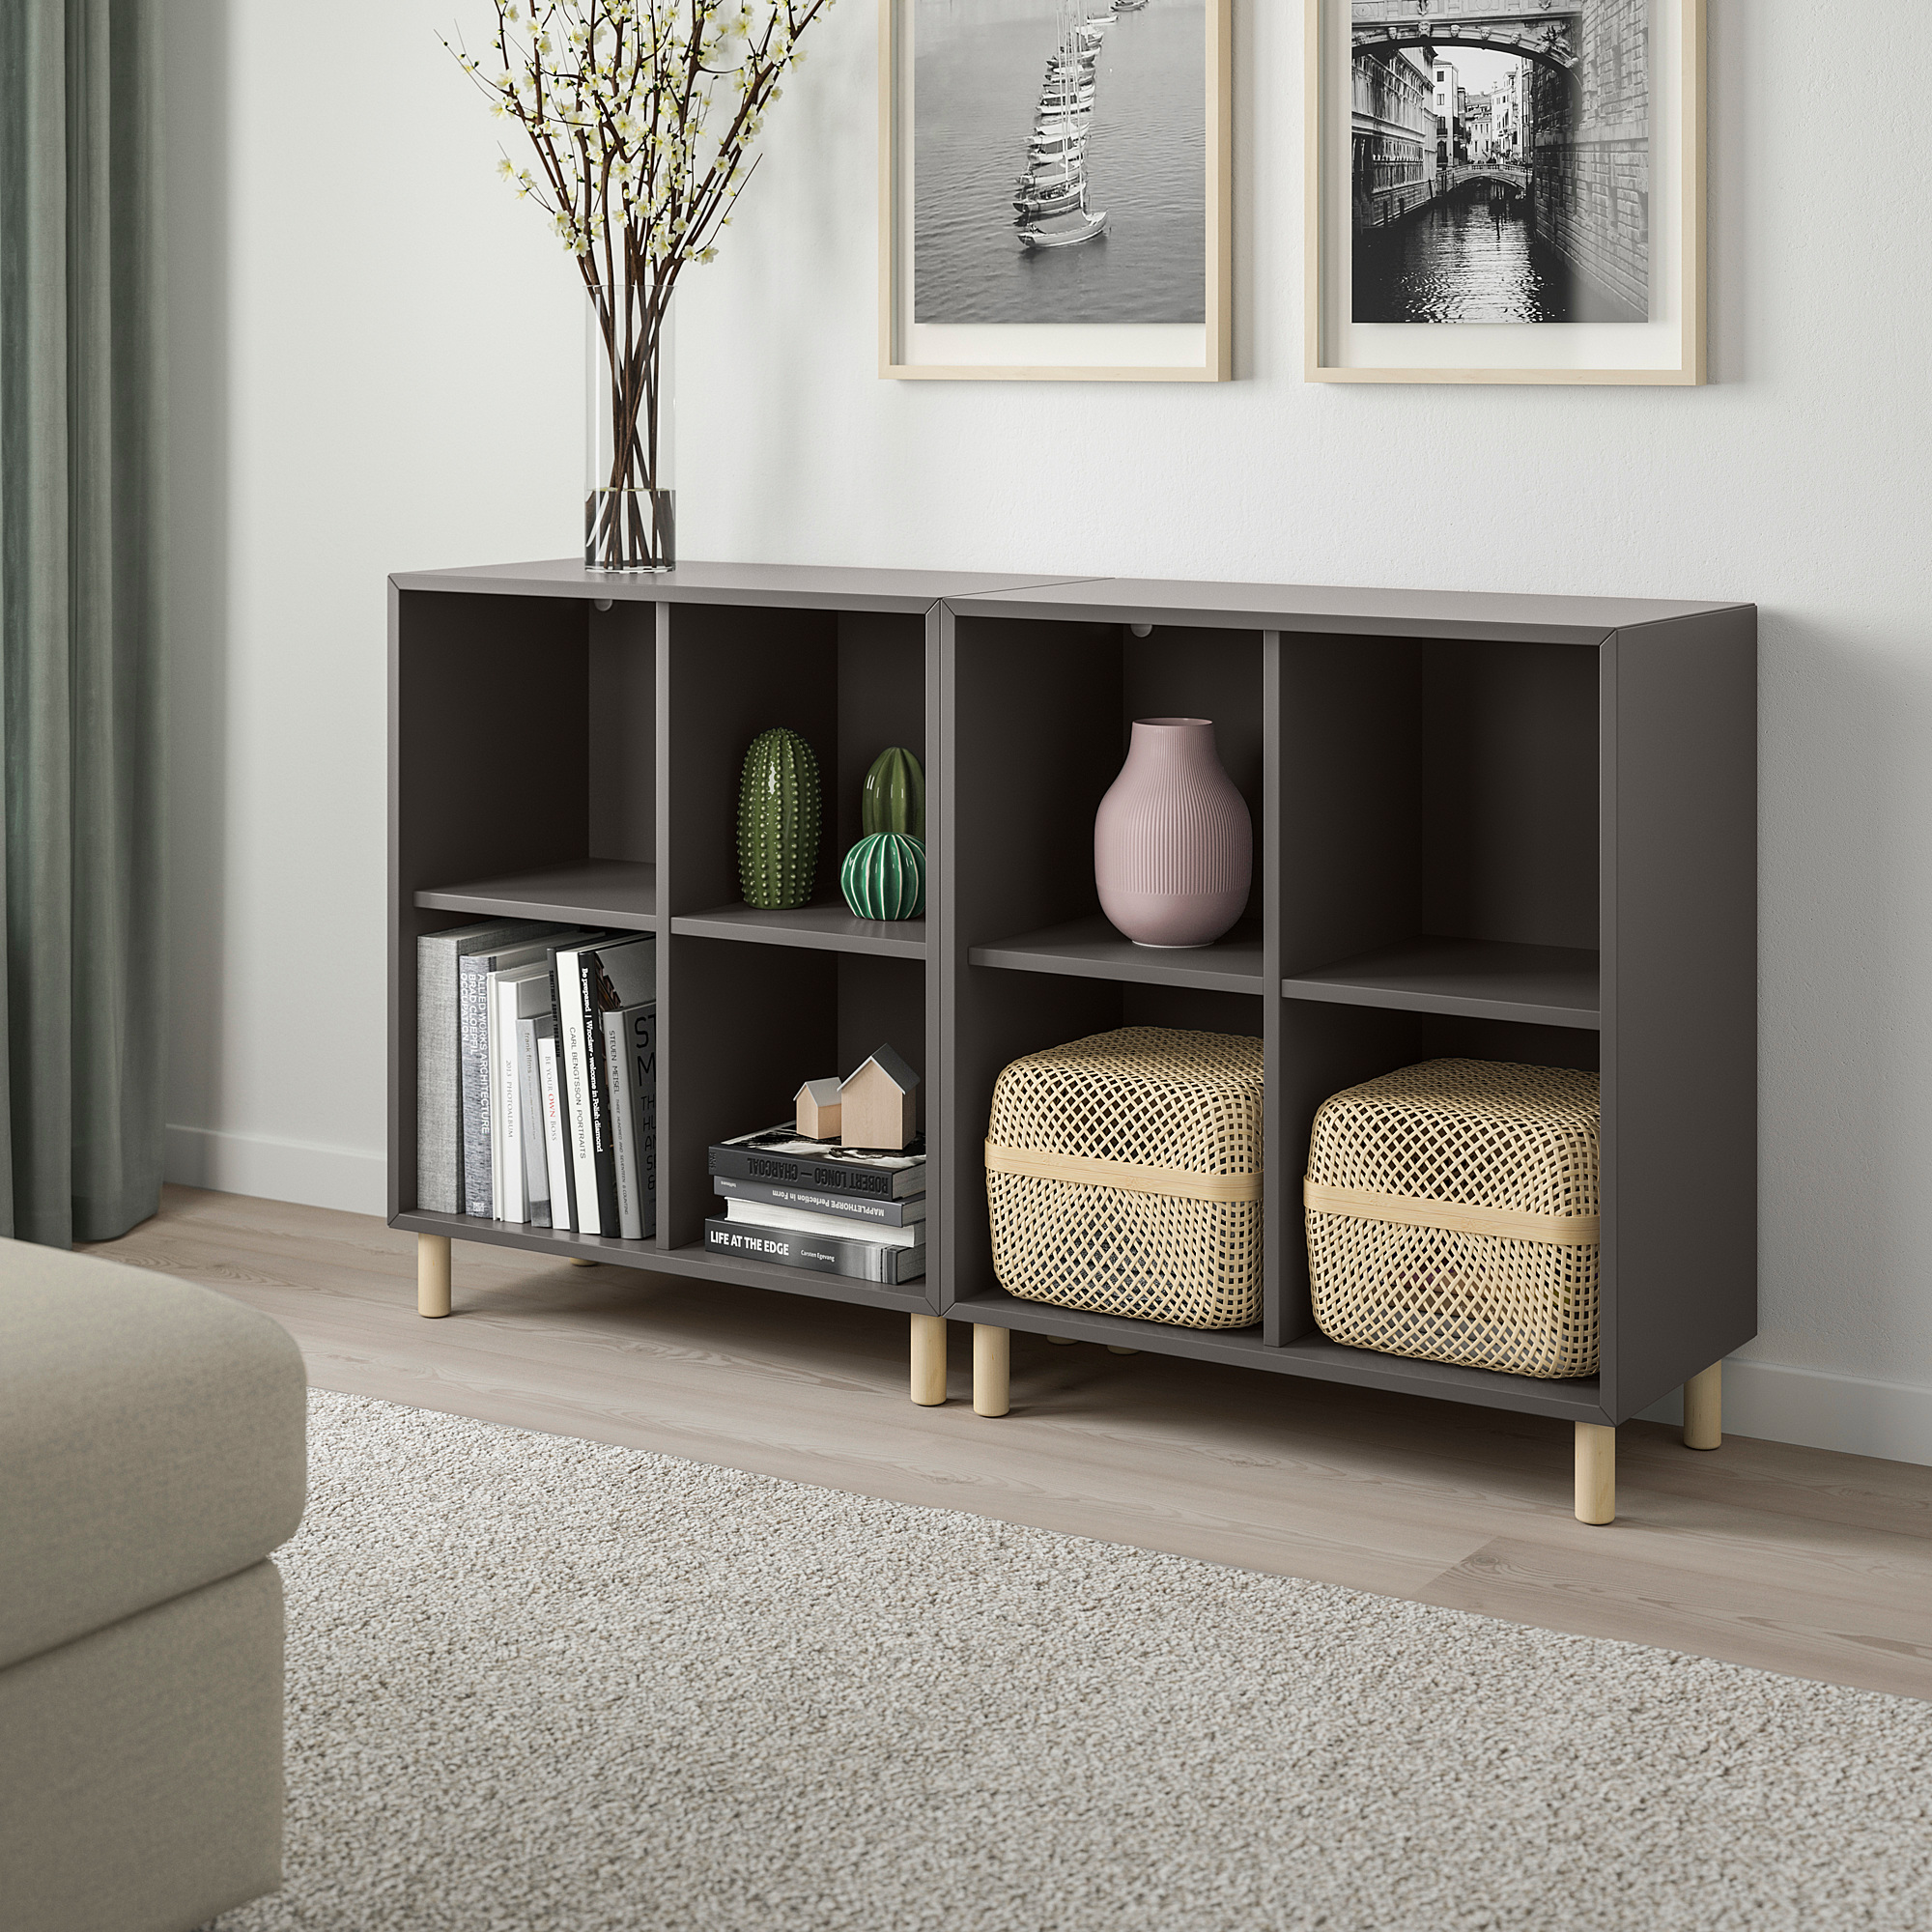 EKET cabinet with 4 compartments